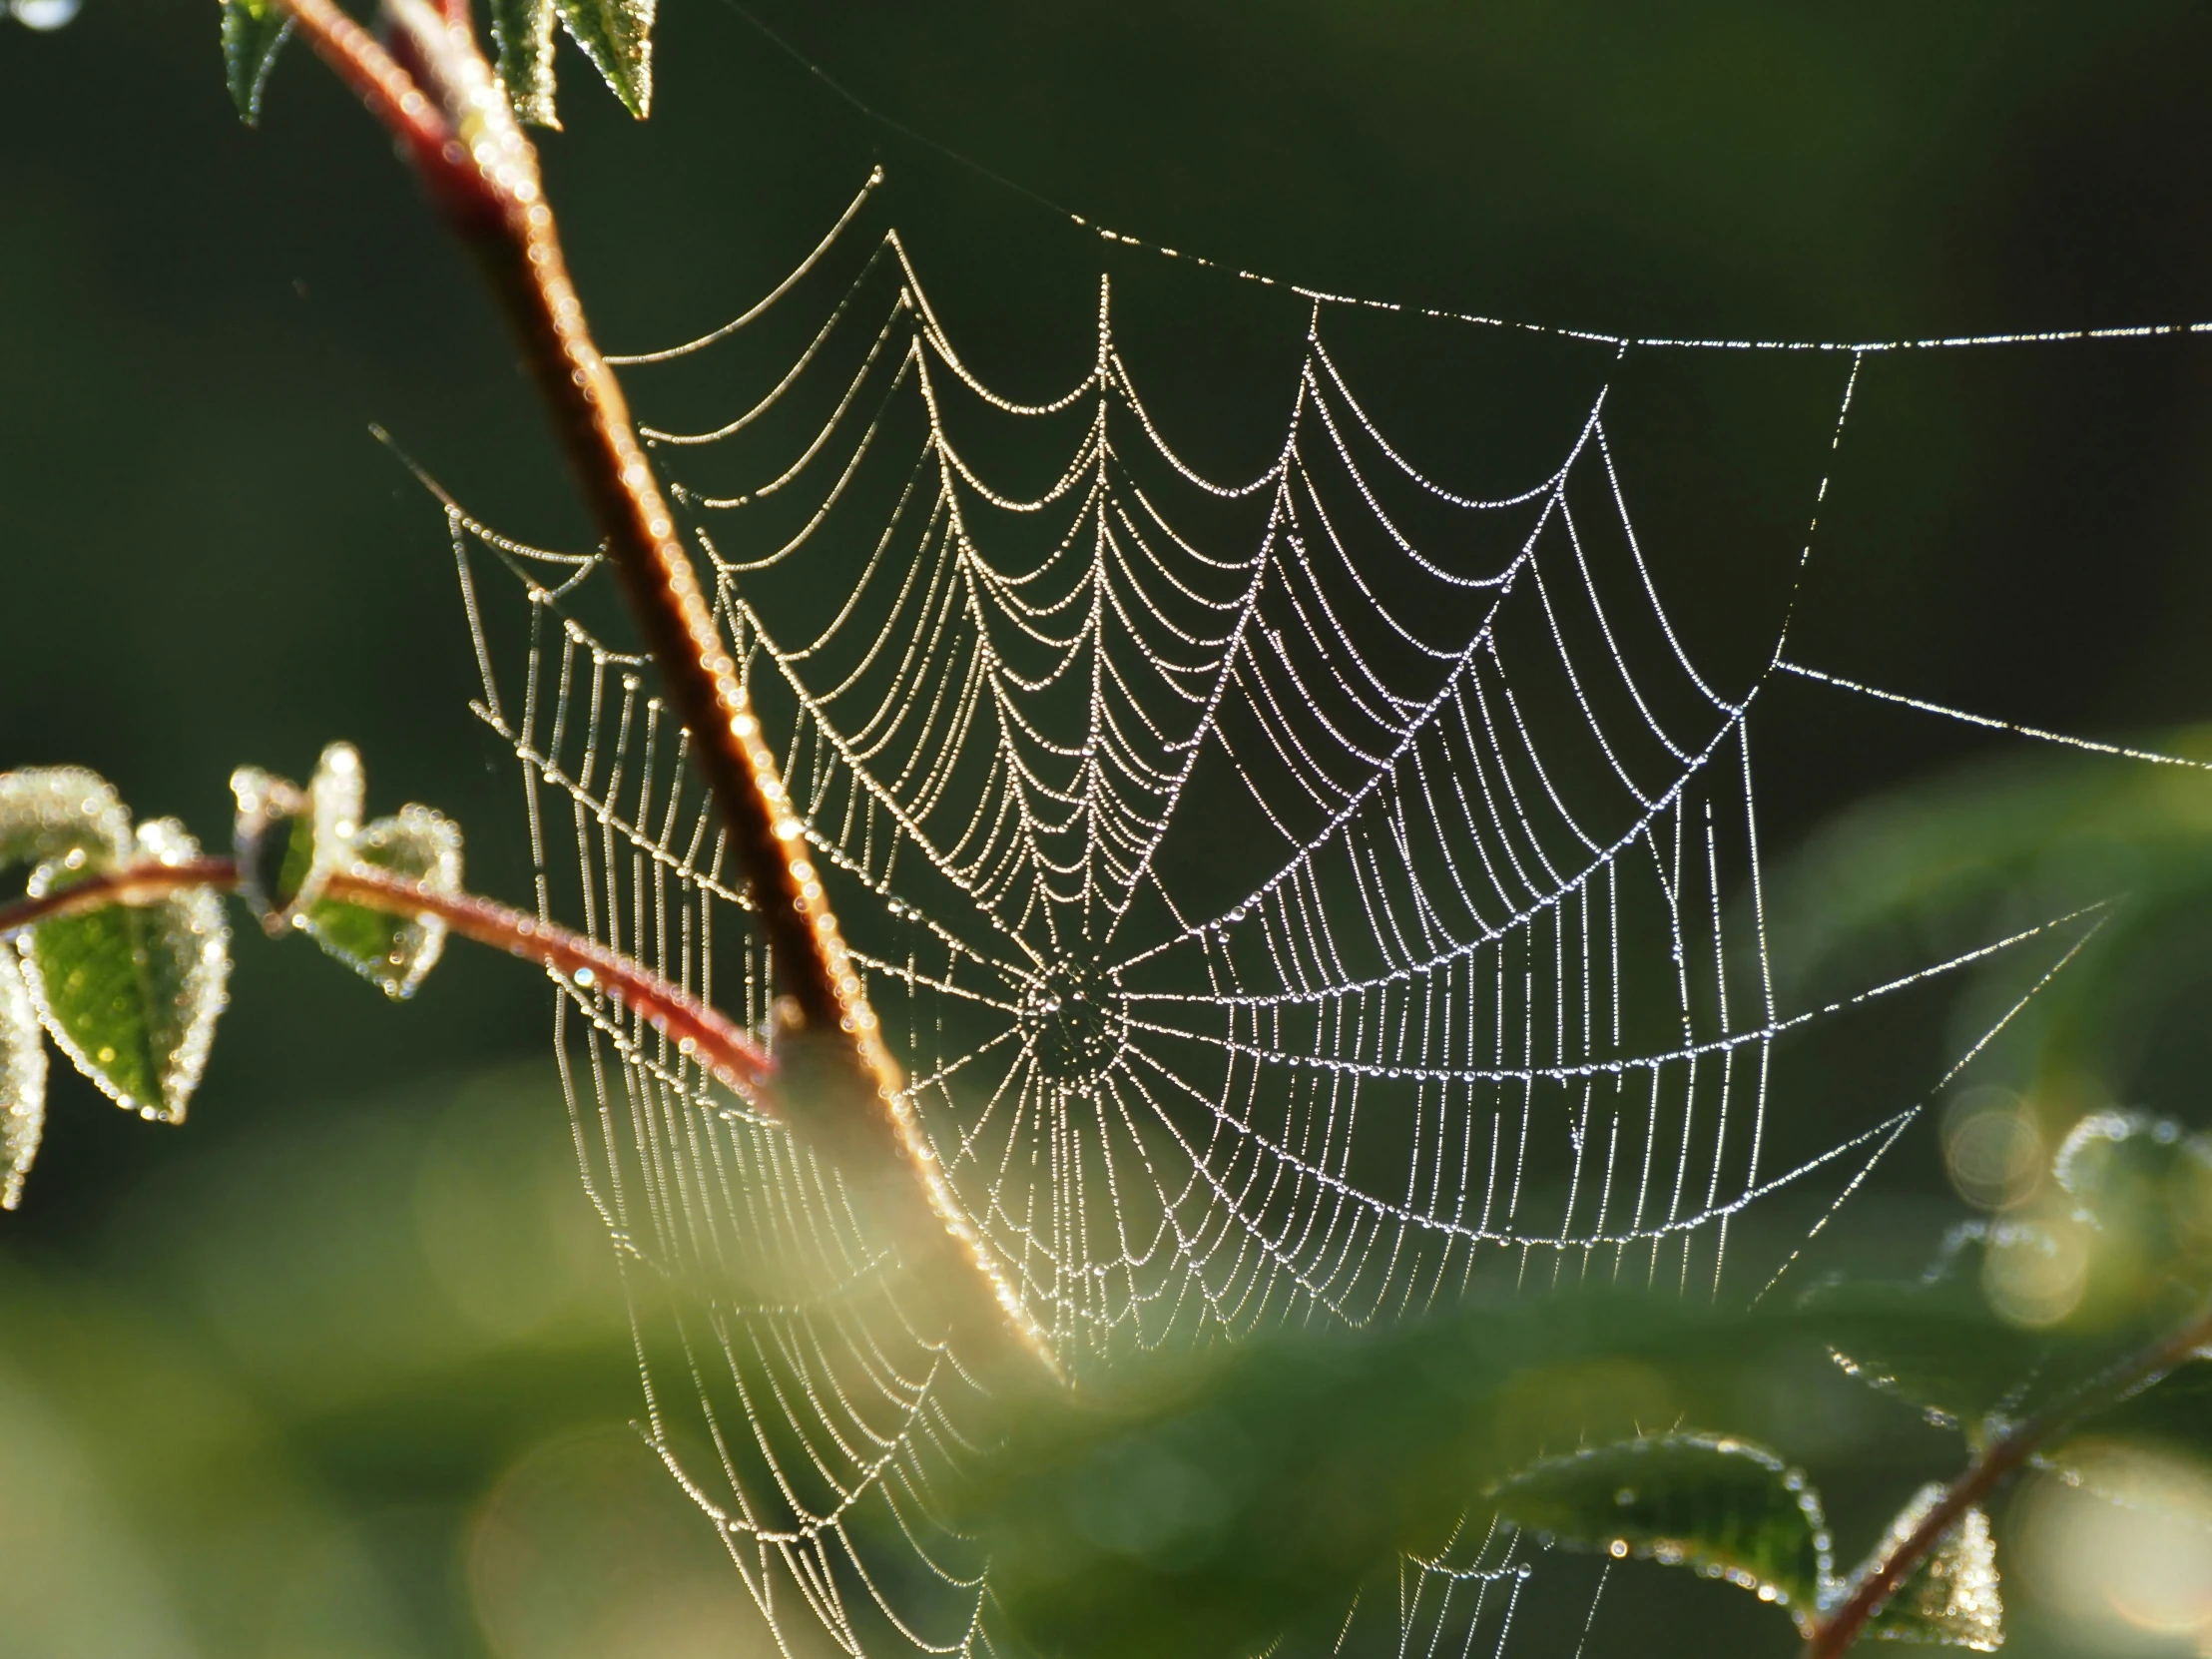 an image of some dew covered spiderweffs